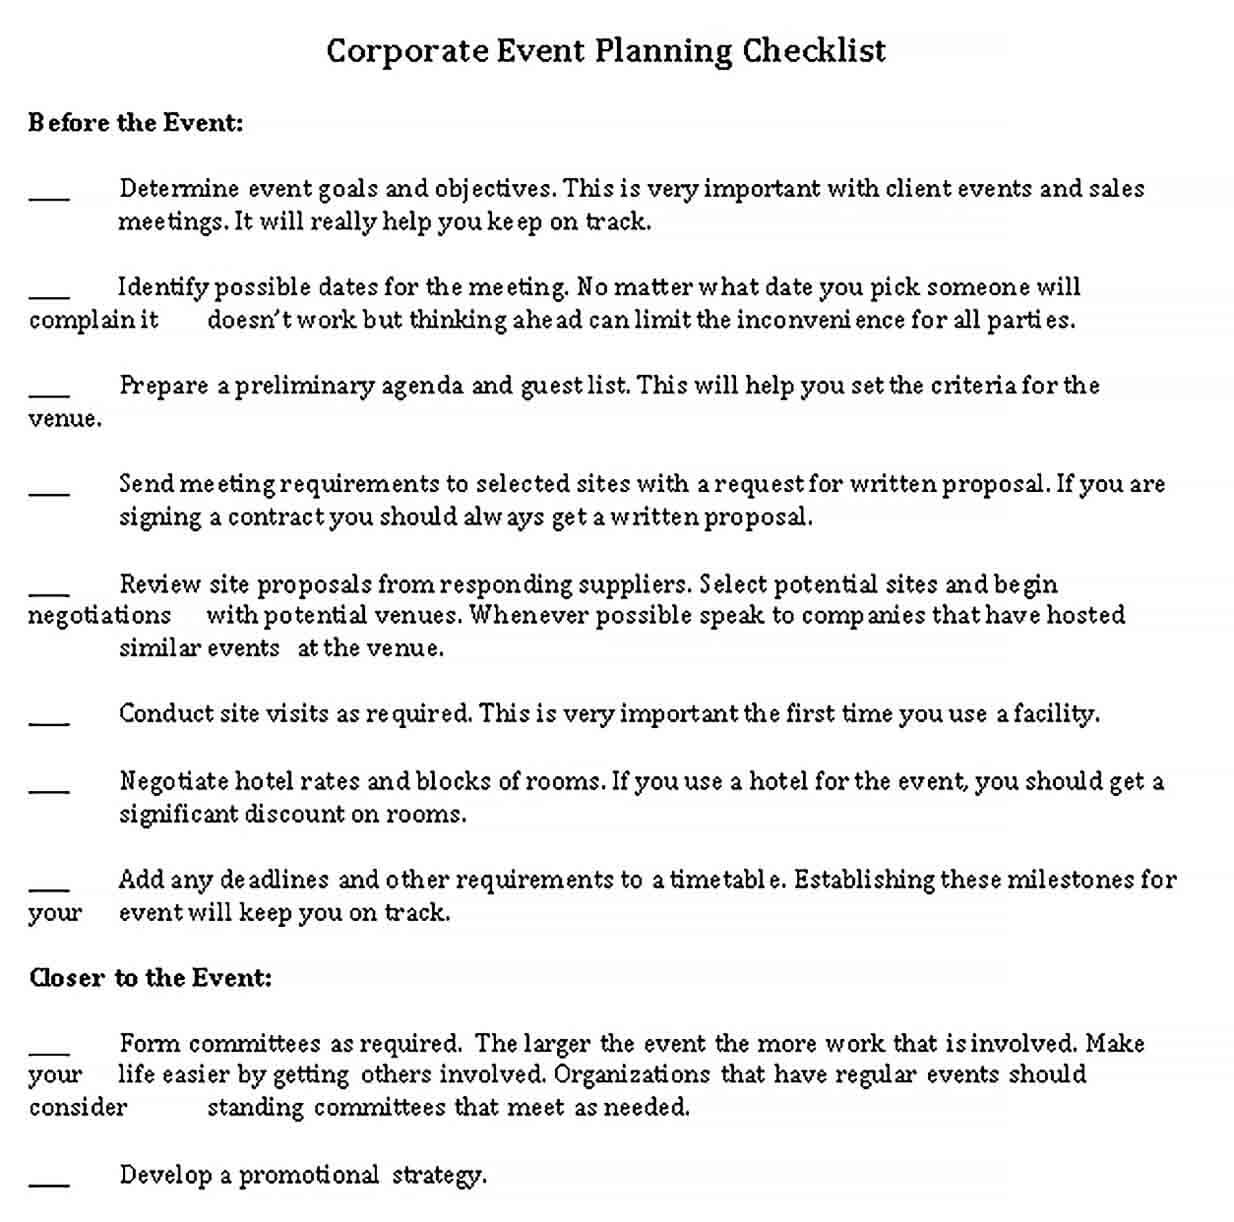 Sample Corporate Event Planning Checklist Template in Word